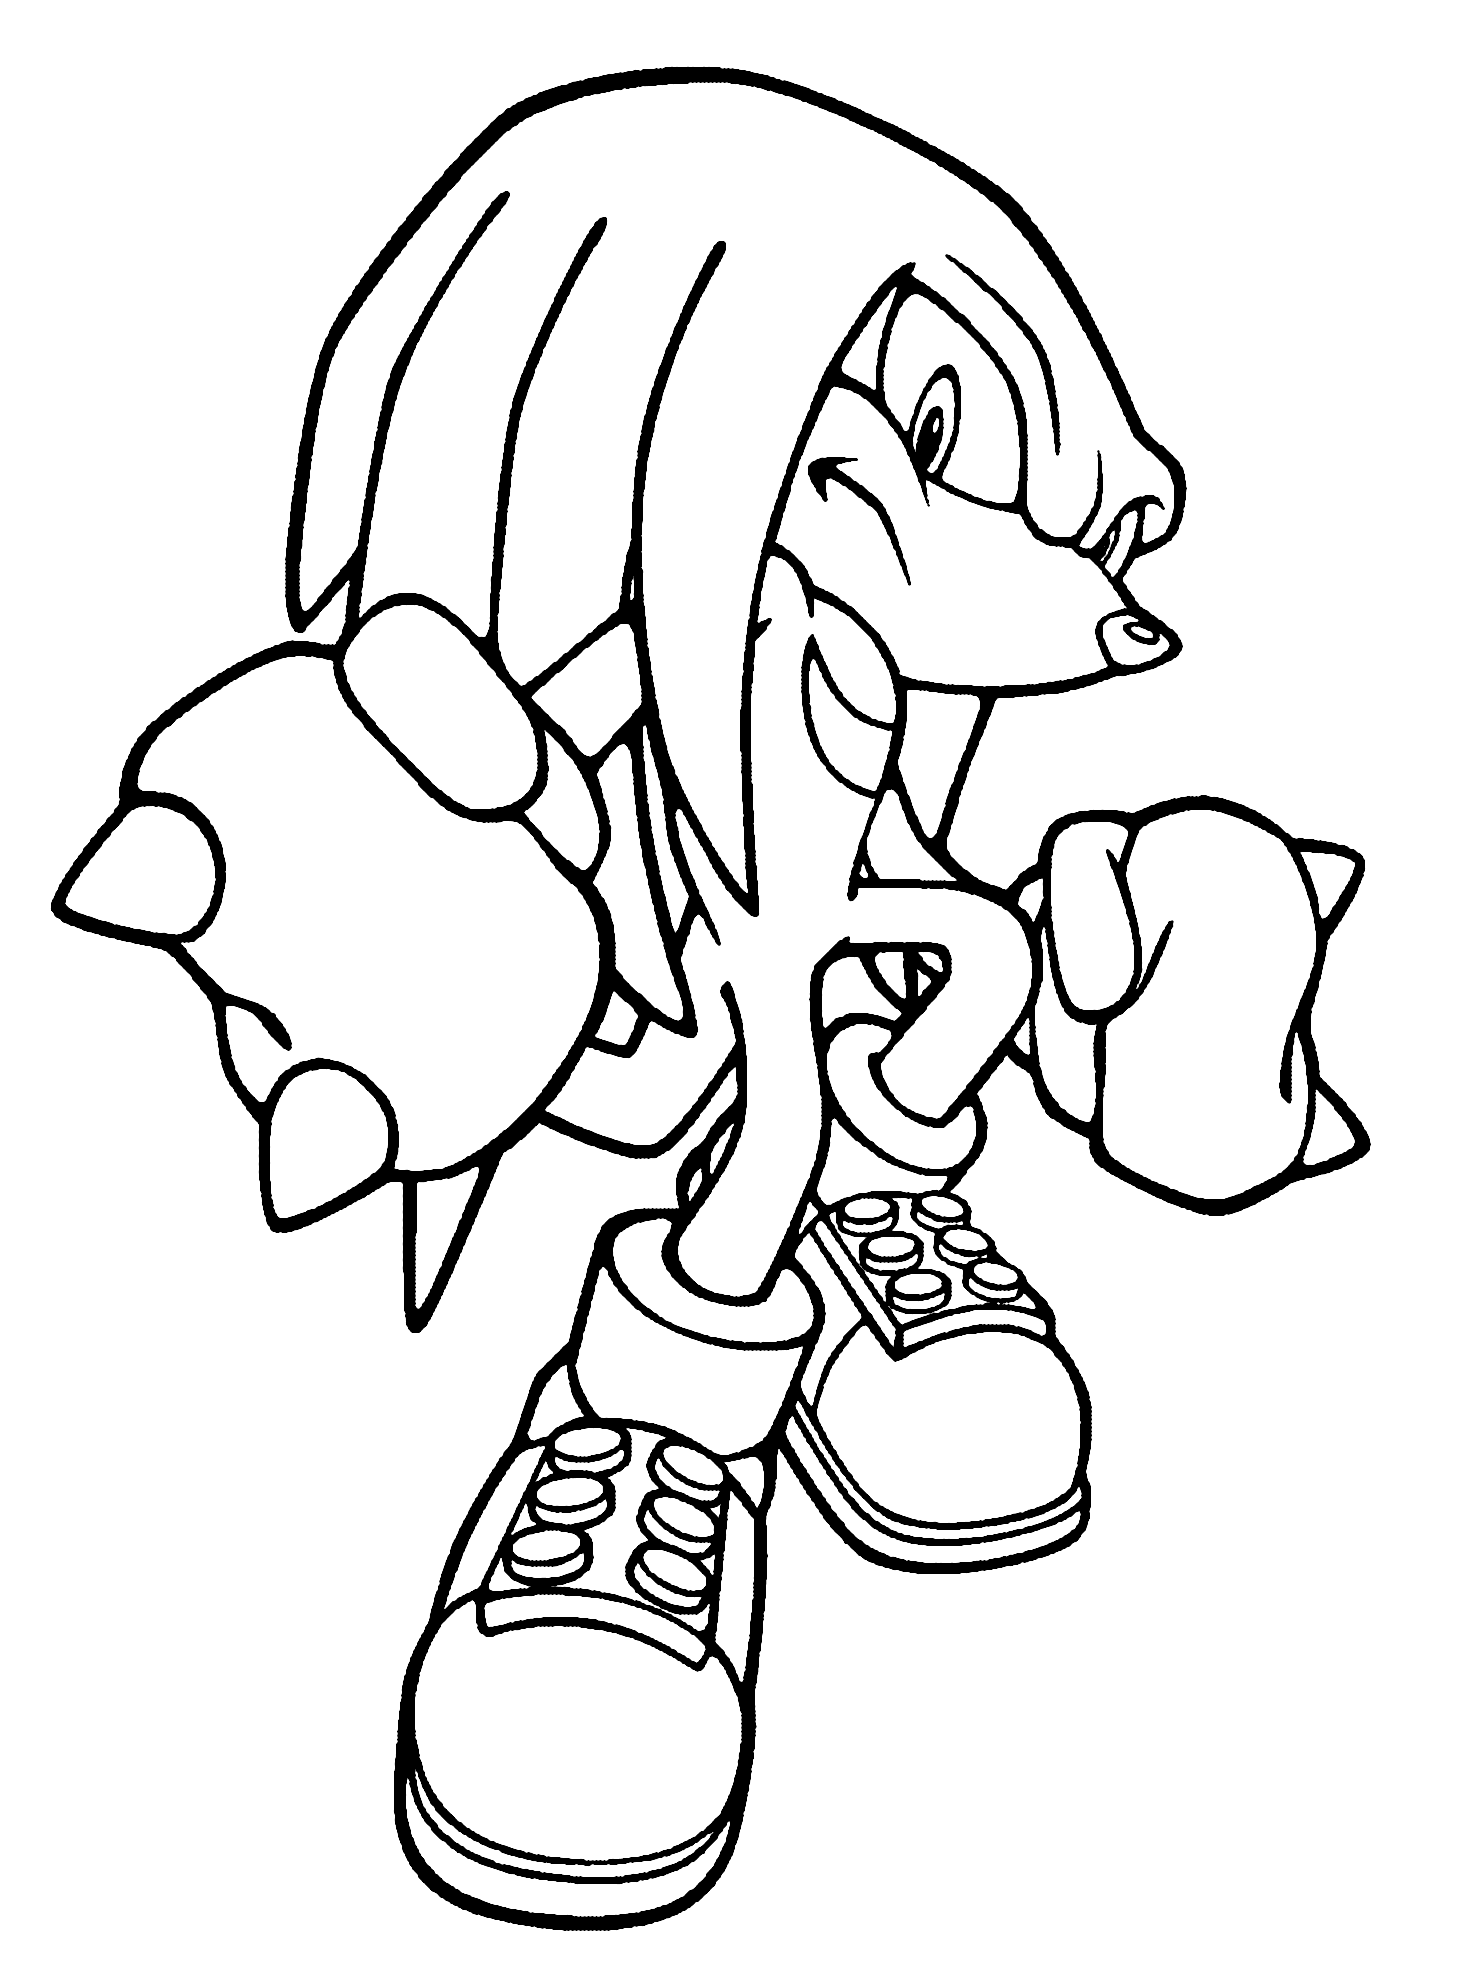 Knuckles Sonic coloring page - free printable coloring pages on coloori.com